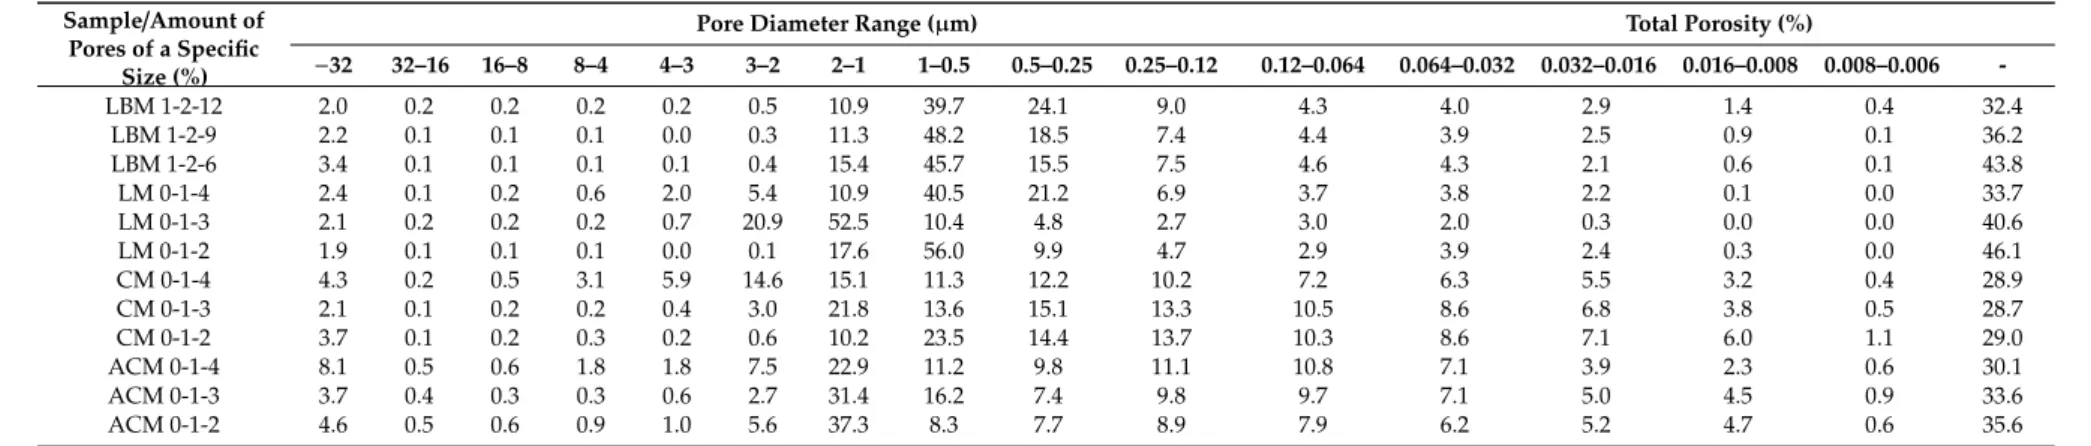 Table 4. Pore size distribution and total porosity of mortar specimens.